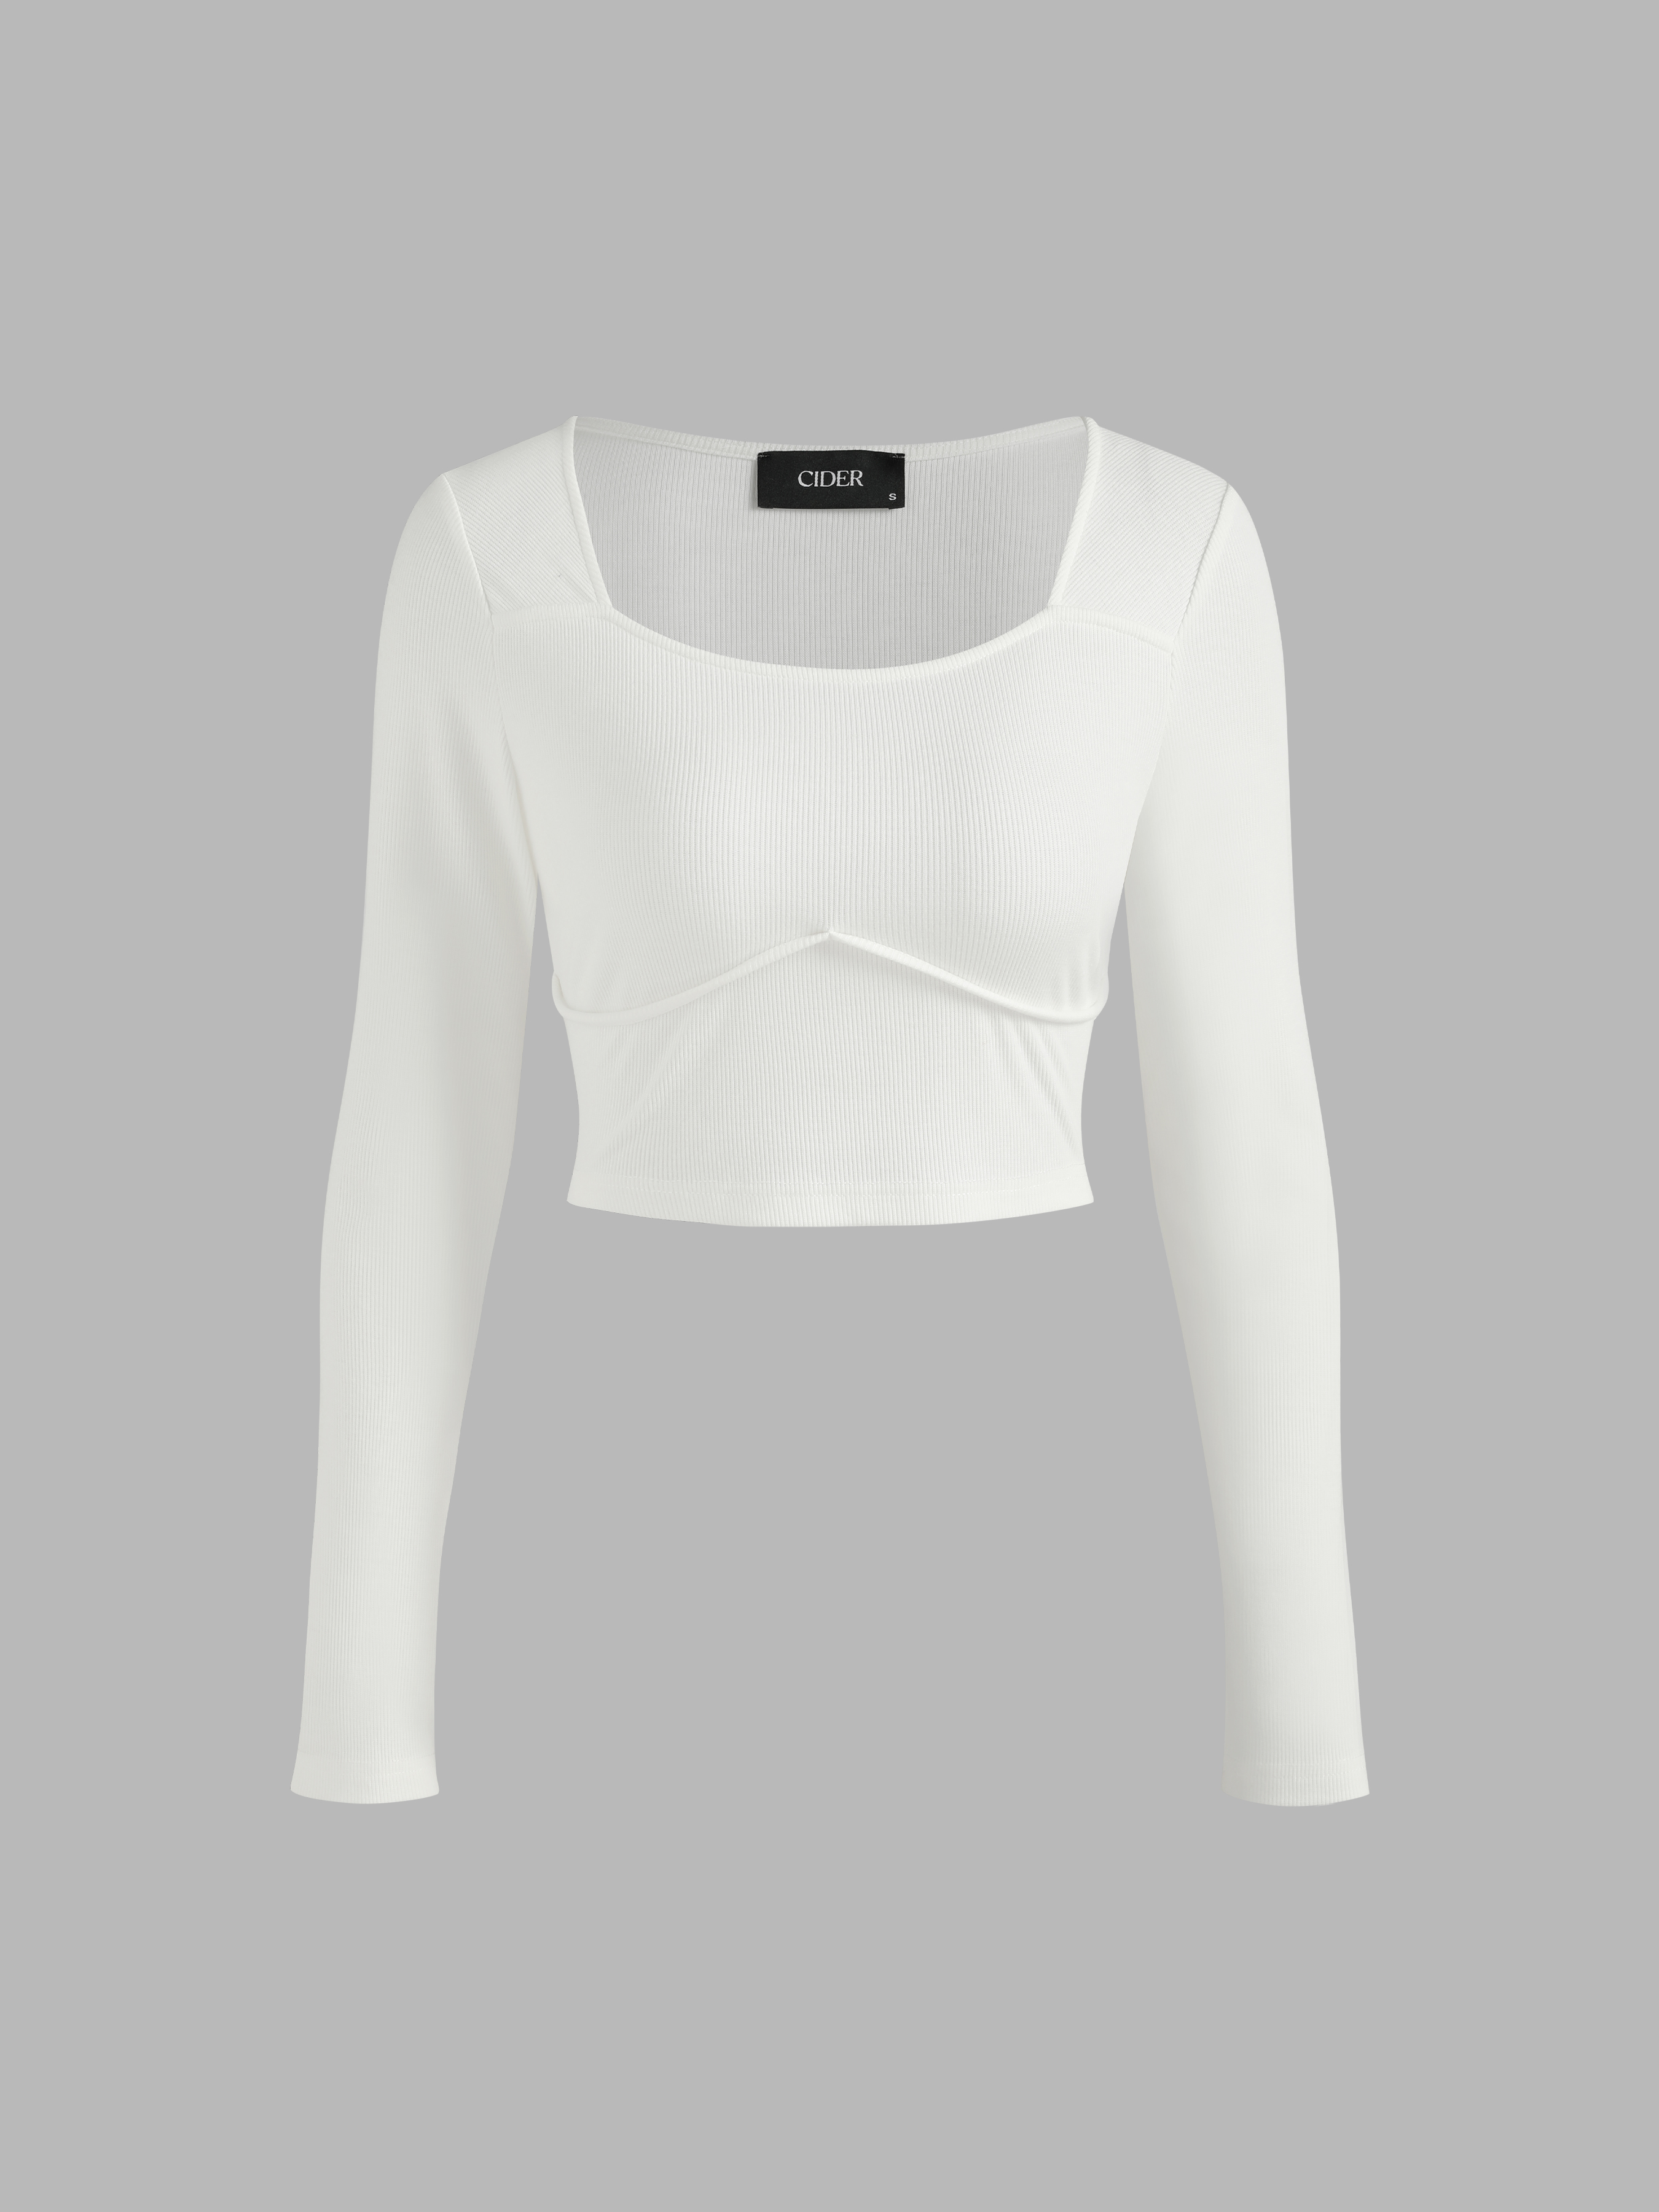 Recycled Fabric Solid Long Sleeve Crop Top - Cider